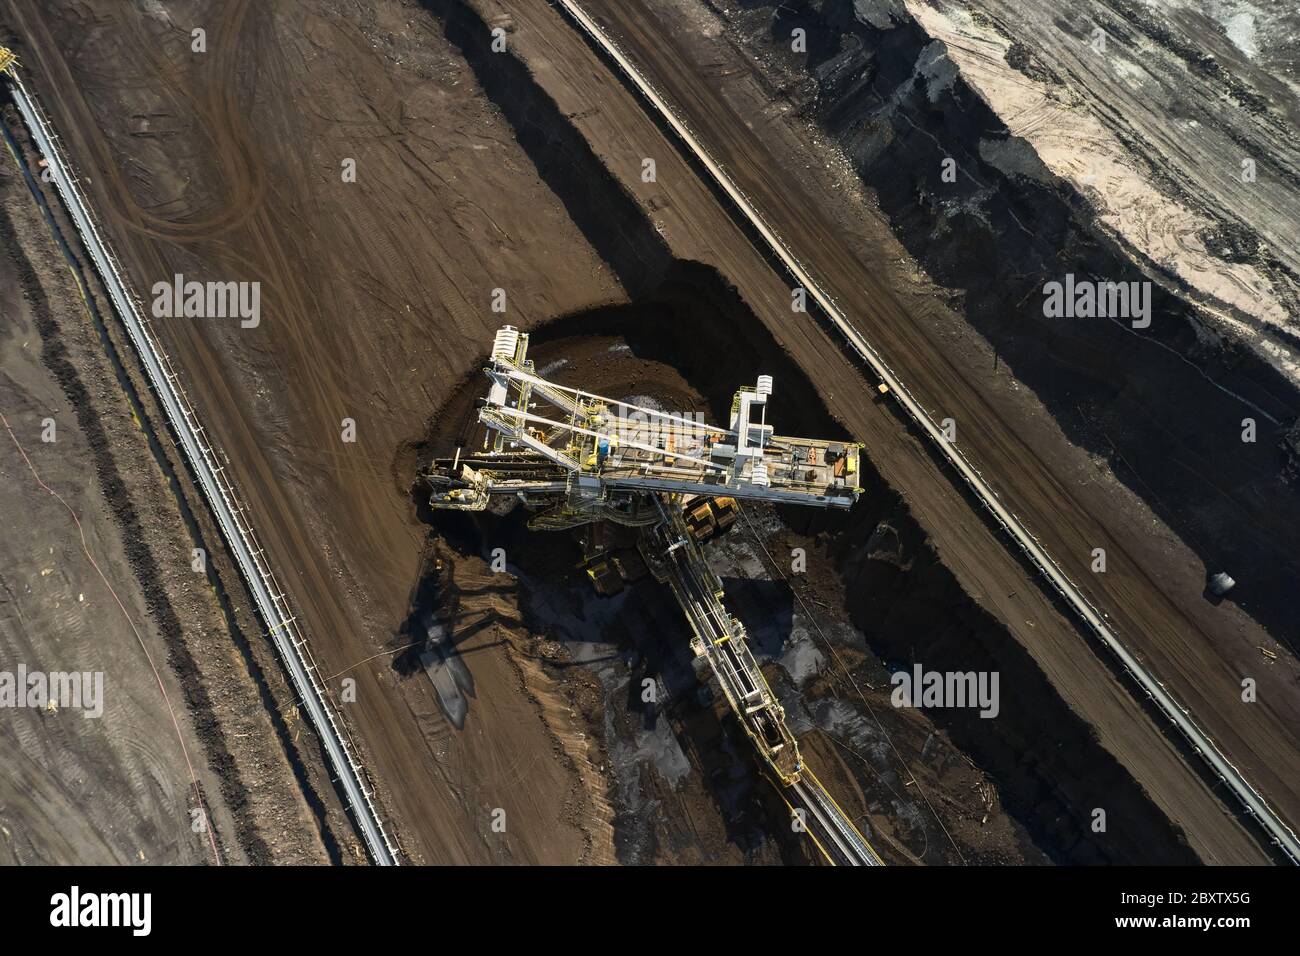 Bucket wheel excavator in a lignite quarry in process, Heavy industry.  Stock Photo